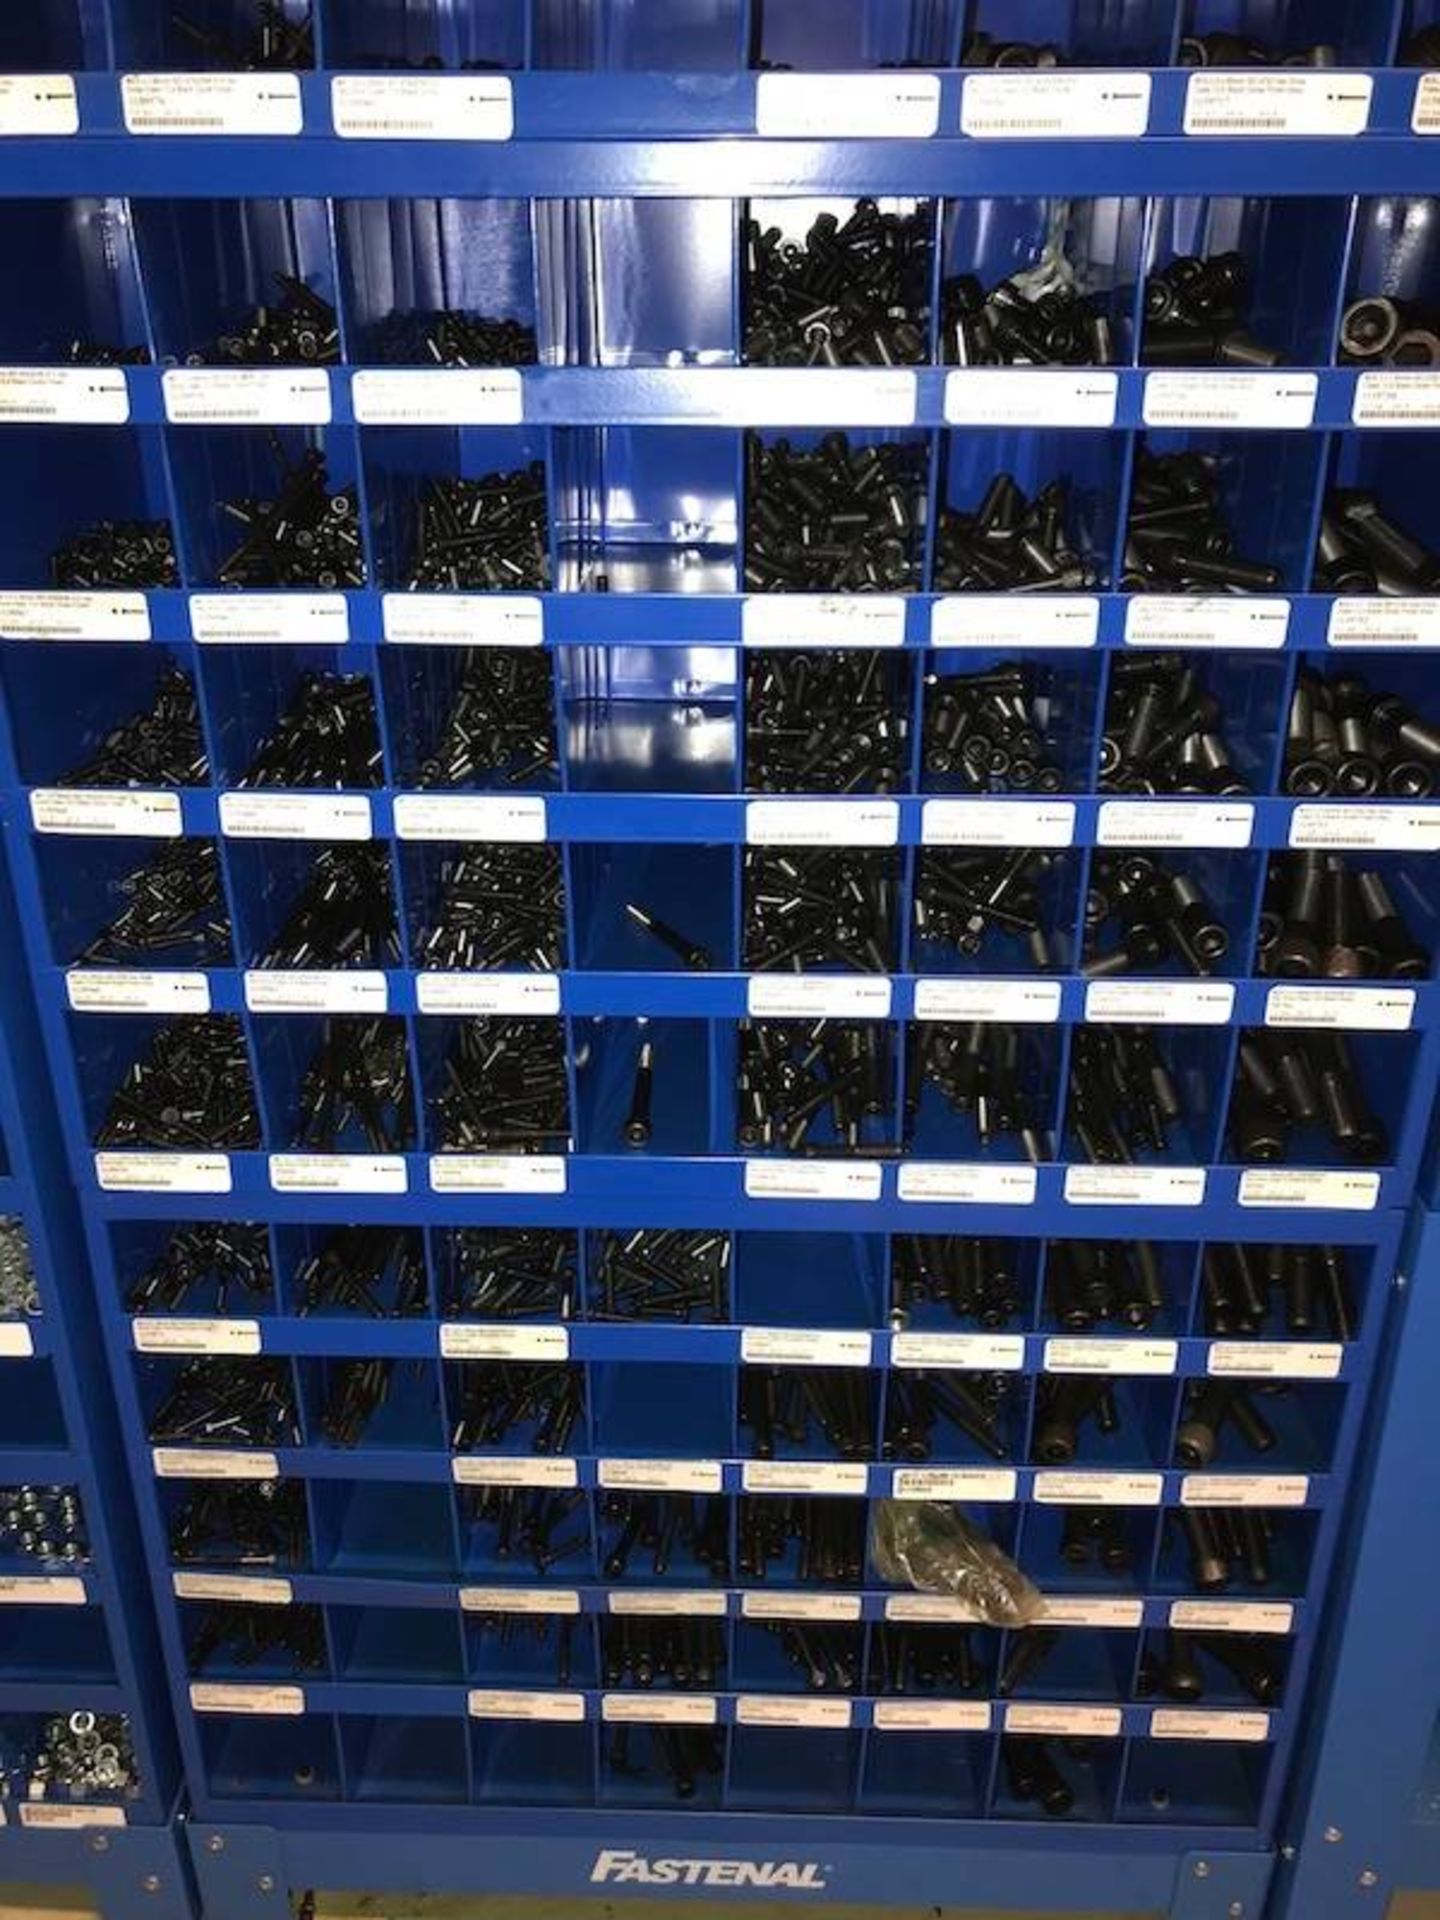 Contents of Fastenal Parts Bins - Image 68 of 70